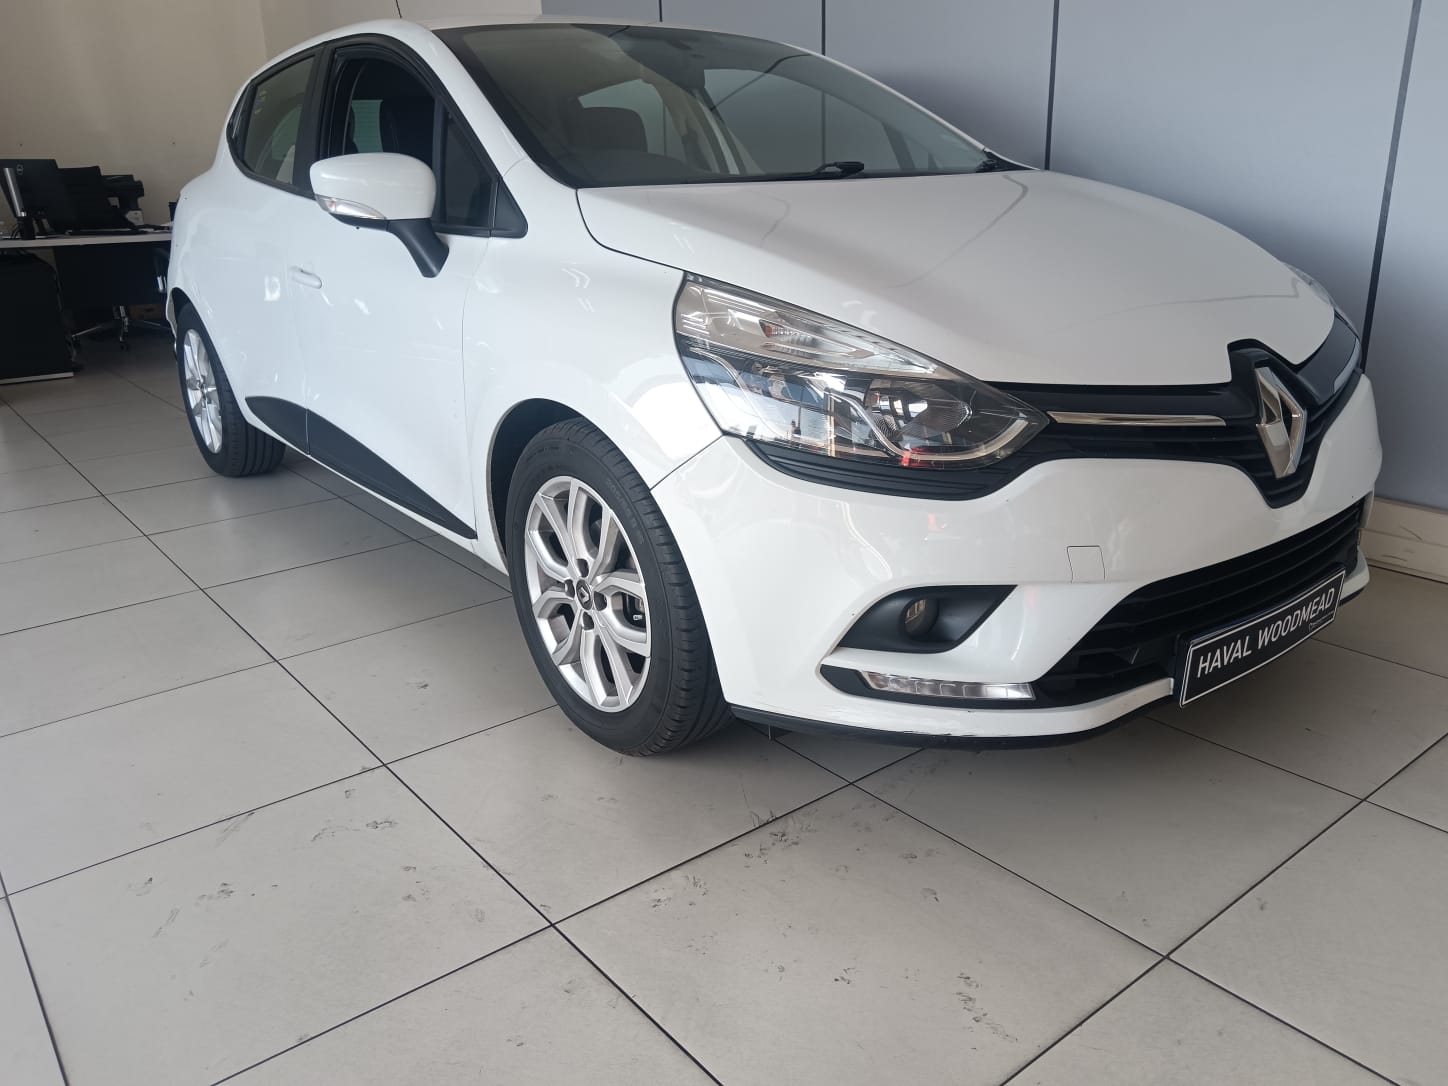 2018 Renault Clio  for sale - UH70830